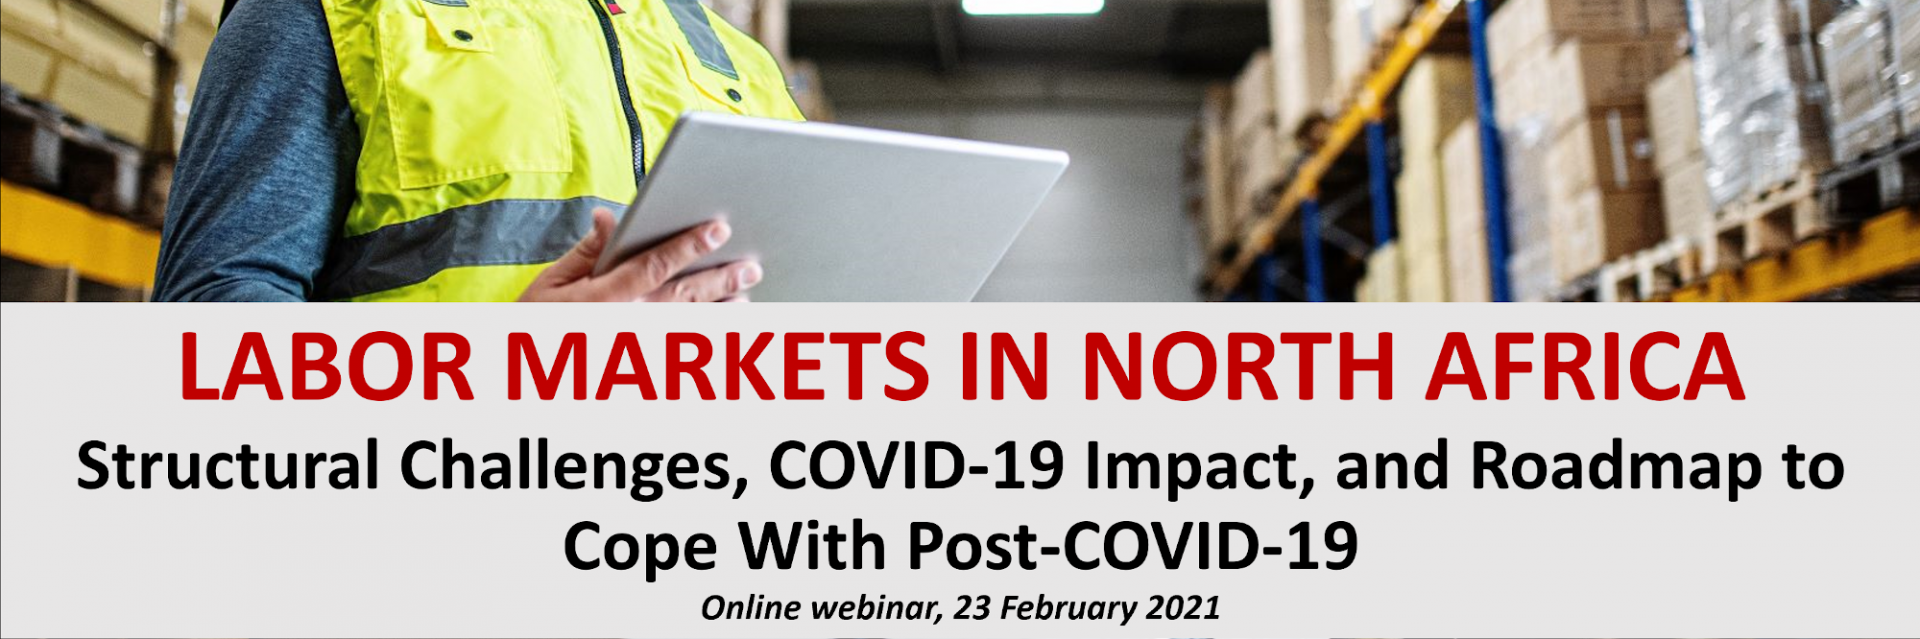 Labour Markets in North Africa: Structural Challenges, COVID-19 Impact and Roadmap to cope with Post COVID-19 